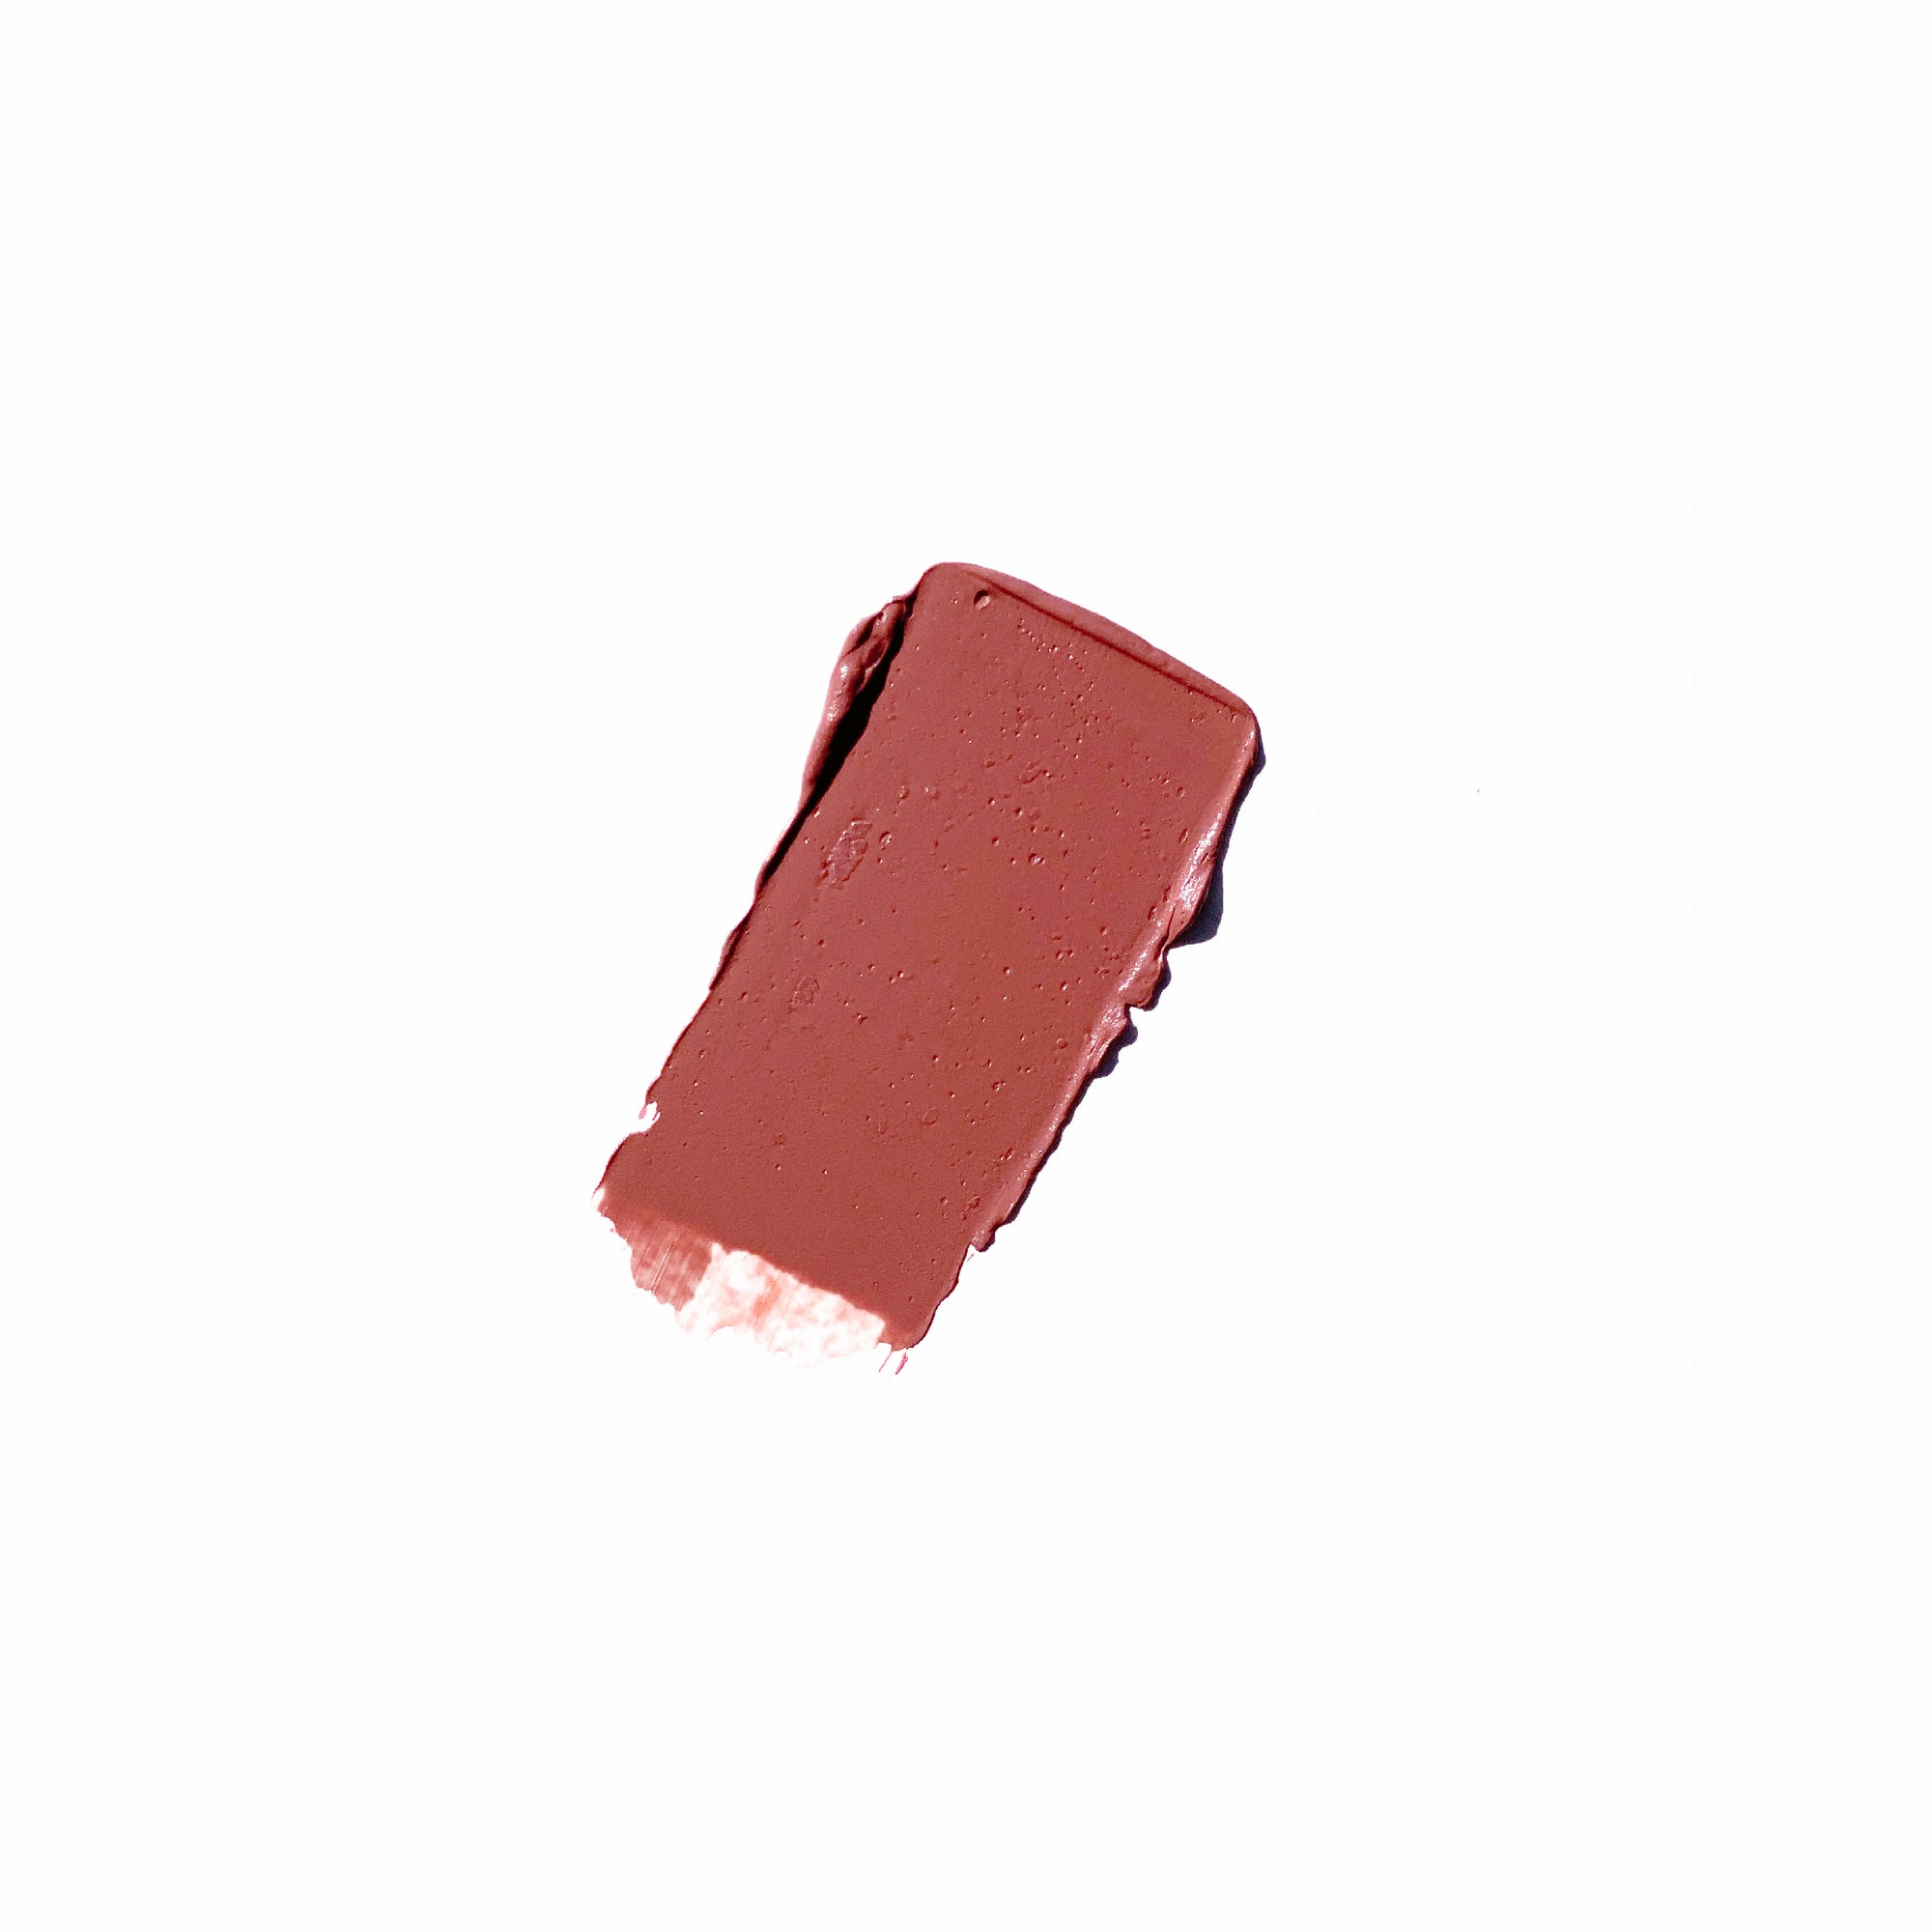 Yulip lipstick in daring nude, a deep brown beige with hint of pink undertone